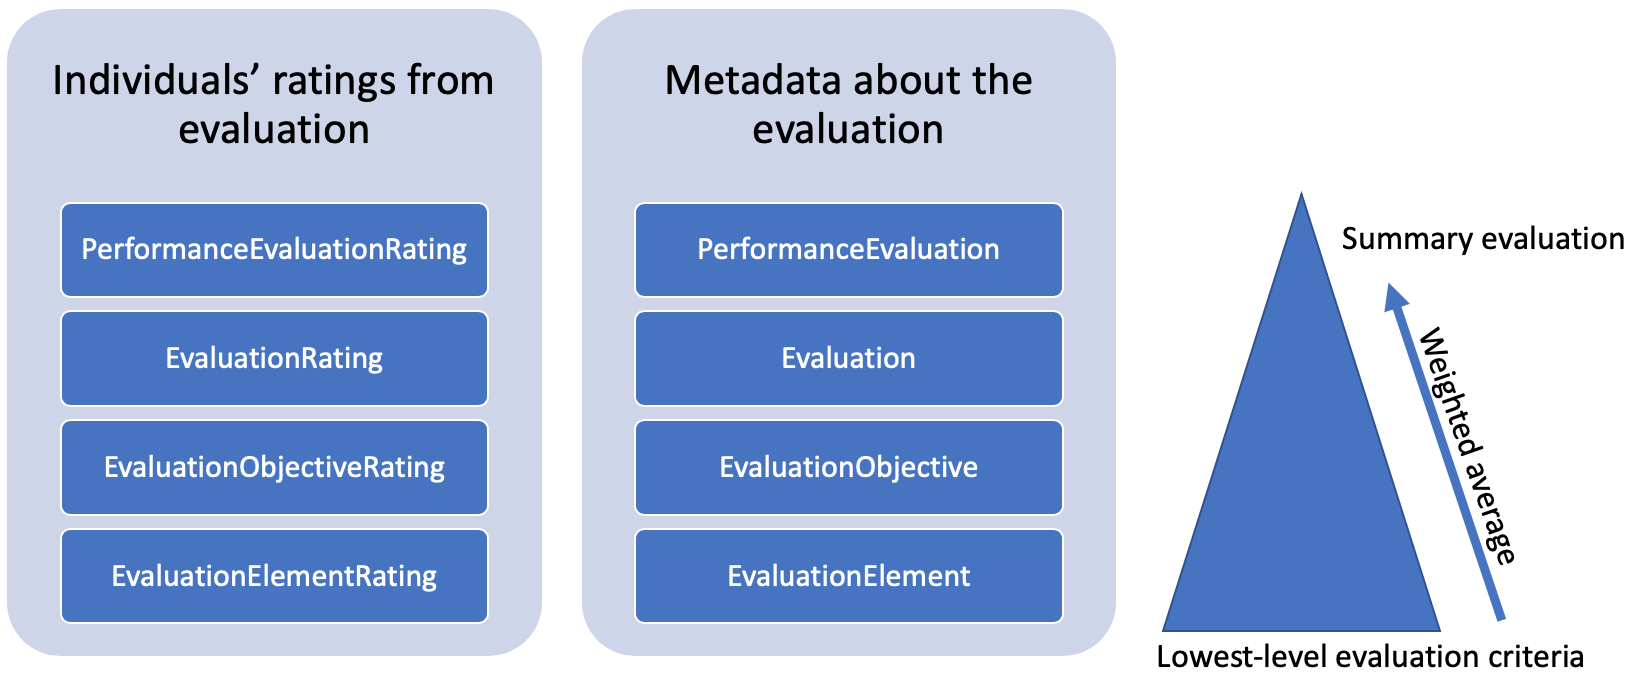 Evaluation Rating and Metadata Levels